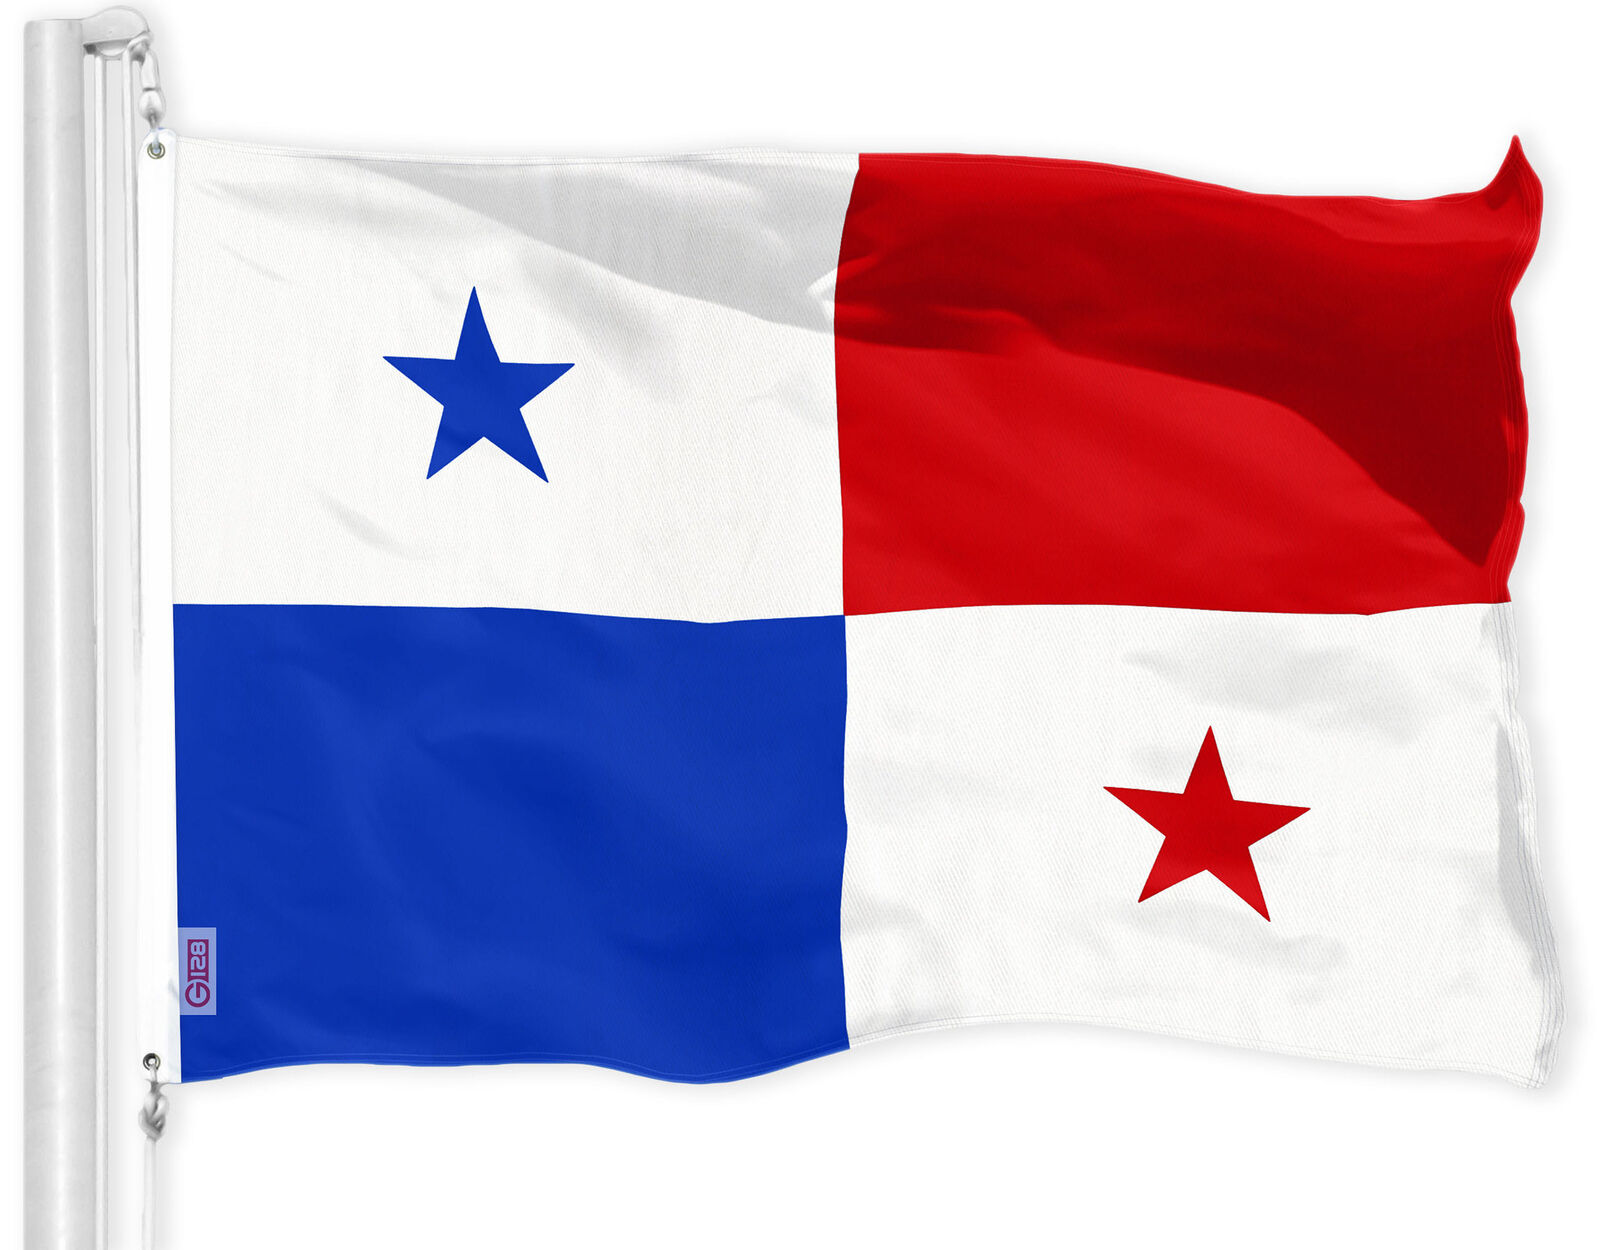 Panama Panamanian Flag 3x5 FT Printed 150D Polyester By G128